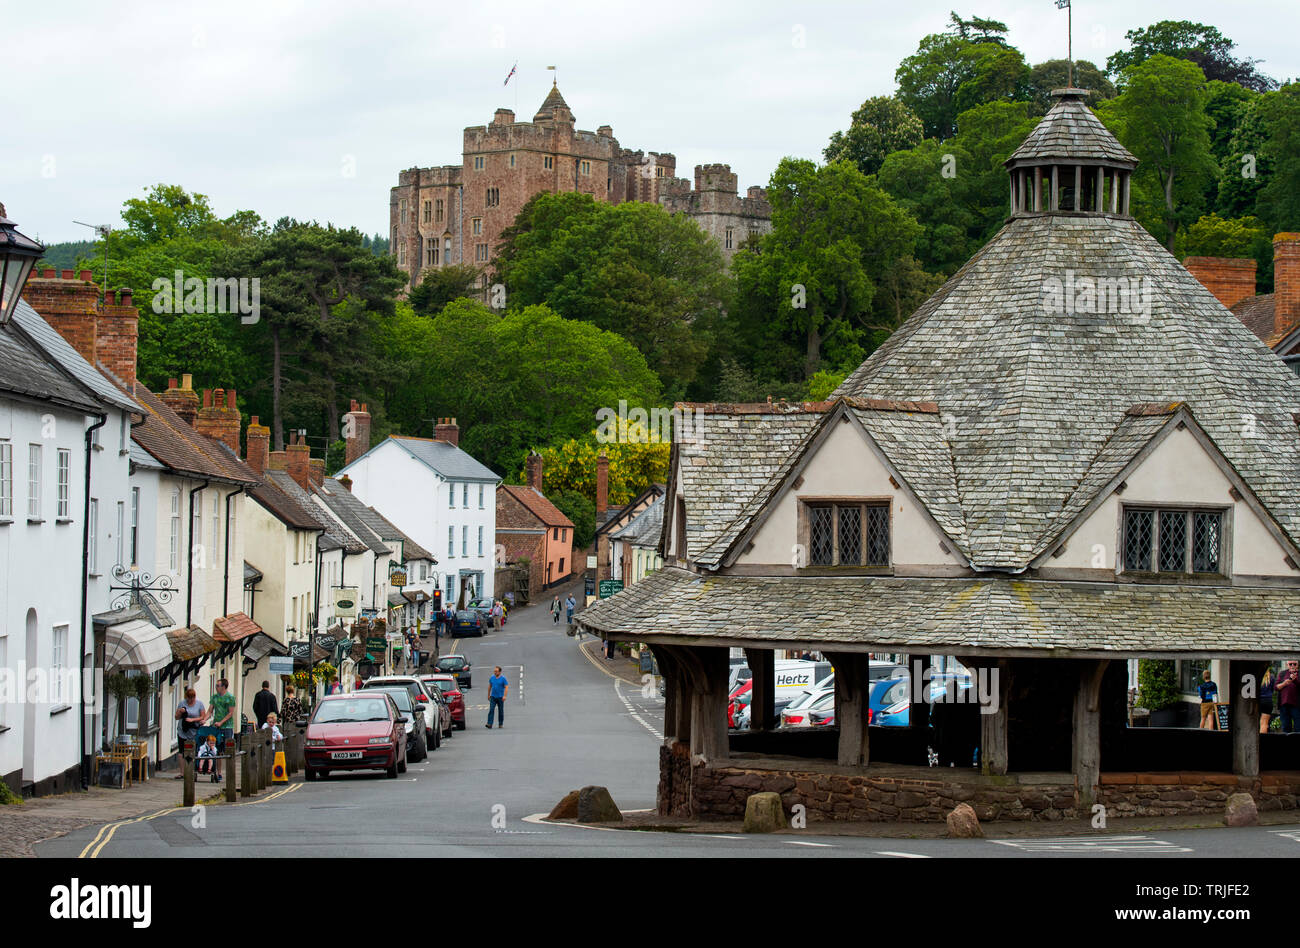 Dunster Exmoor Somerset England UK. May 2019 Showing Dinster Castle and Yarn Market Dunster is a village, civil parish and former manor within the Eng Stock Photo